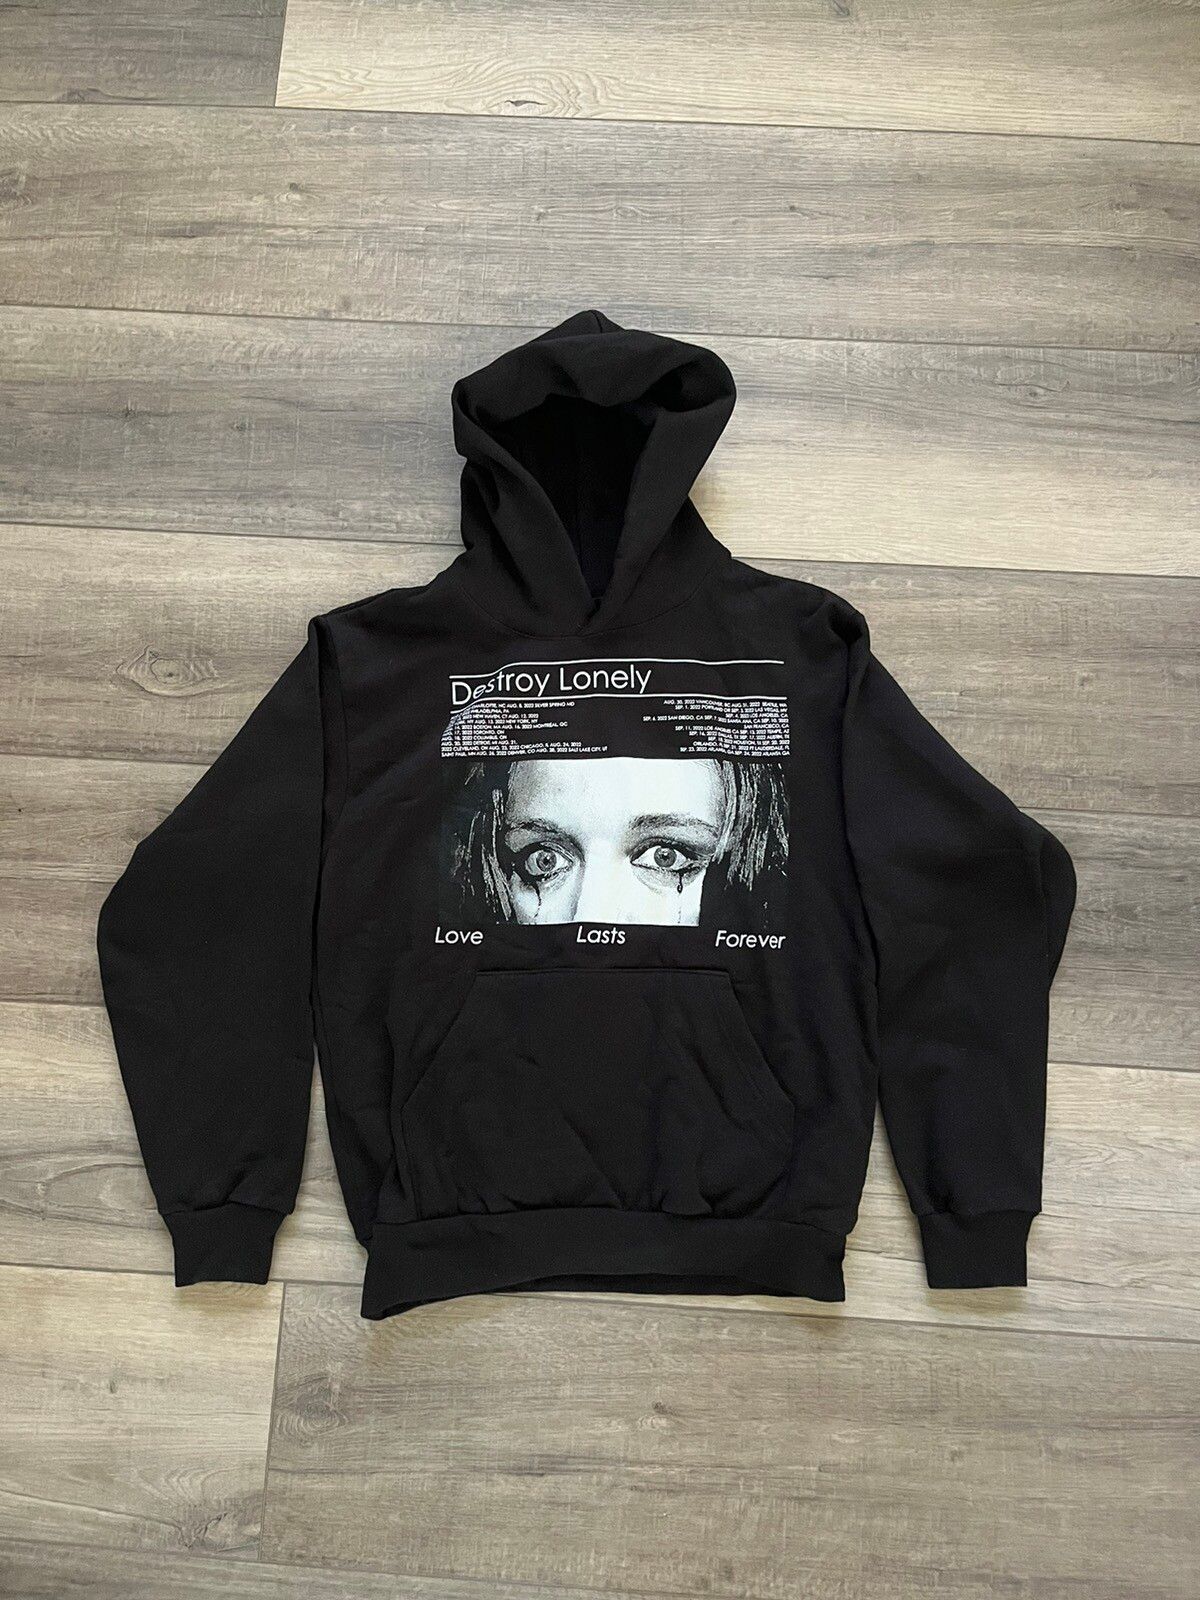 Archival Clothing Destroy Lonely Hoodie - XMAN TOUR (Ken Carson) | Grailed